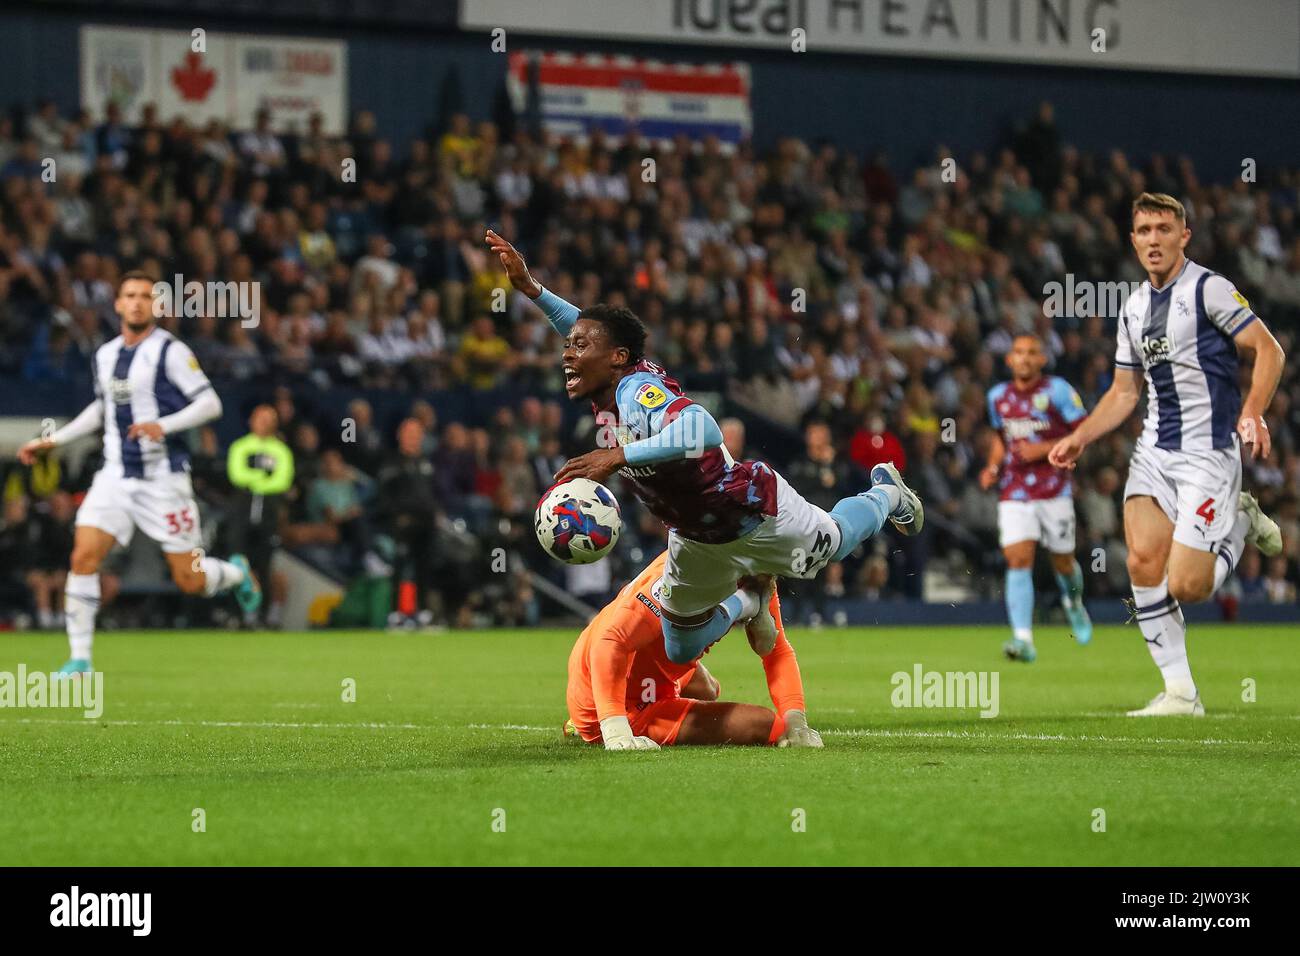 Dave Button #1 of West Bromwich Albion  fouls Nathan Tella #23 of Burnley during the Sky Bet Championship match West Bromwich Albion vs Burnley at The Hawthorns, West Bromwich, United Kingdom, 2nd September 2022  (Photo by Gareth Evans/News Images) Stock Photo